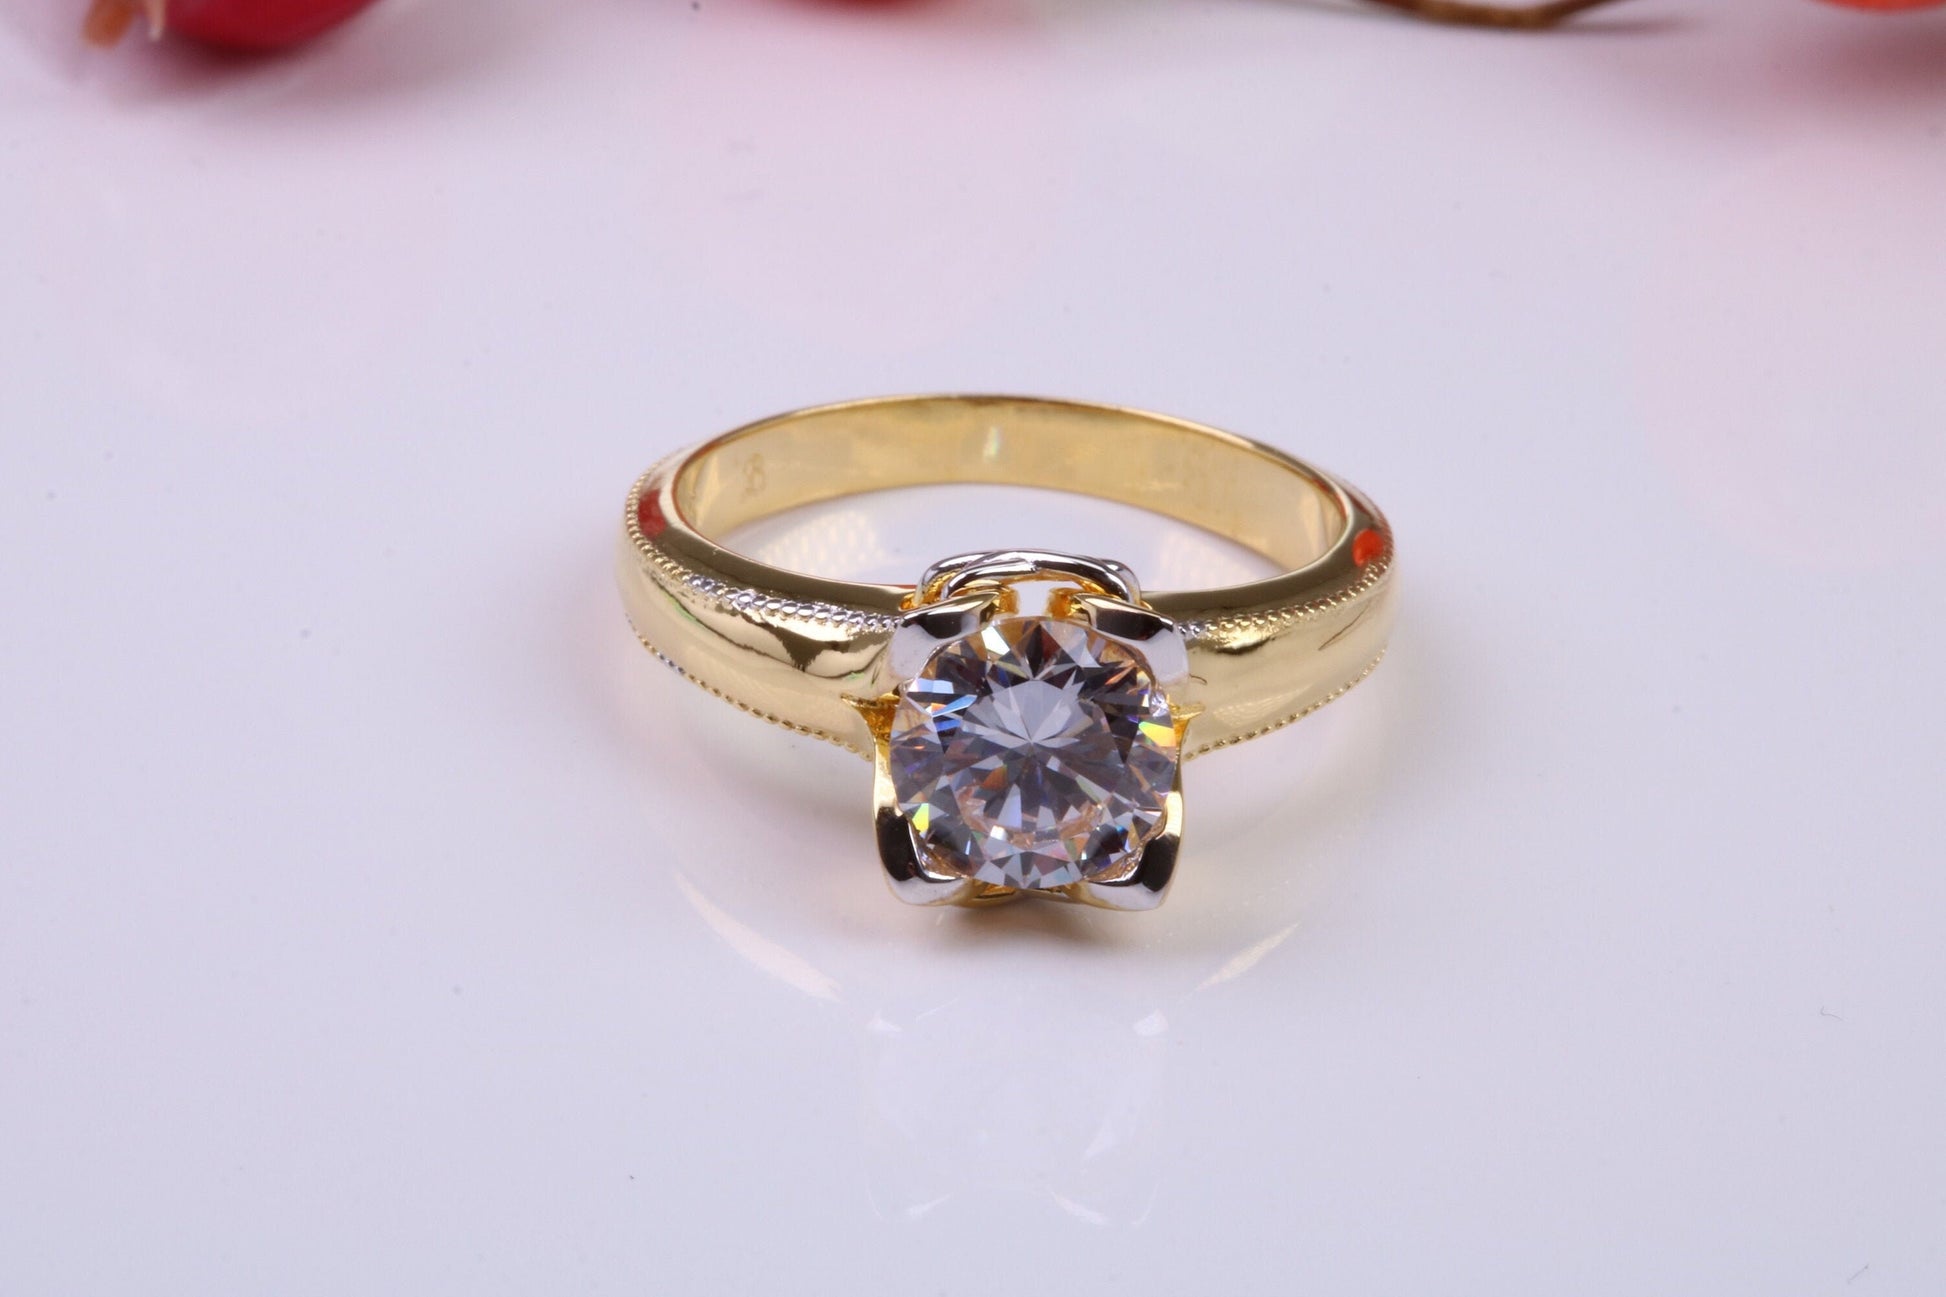 Very Dressy and Chunky Cubic Zirconia set Ring, Made from solid Silver, 18ct Yellow Gold Plated